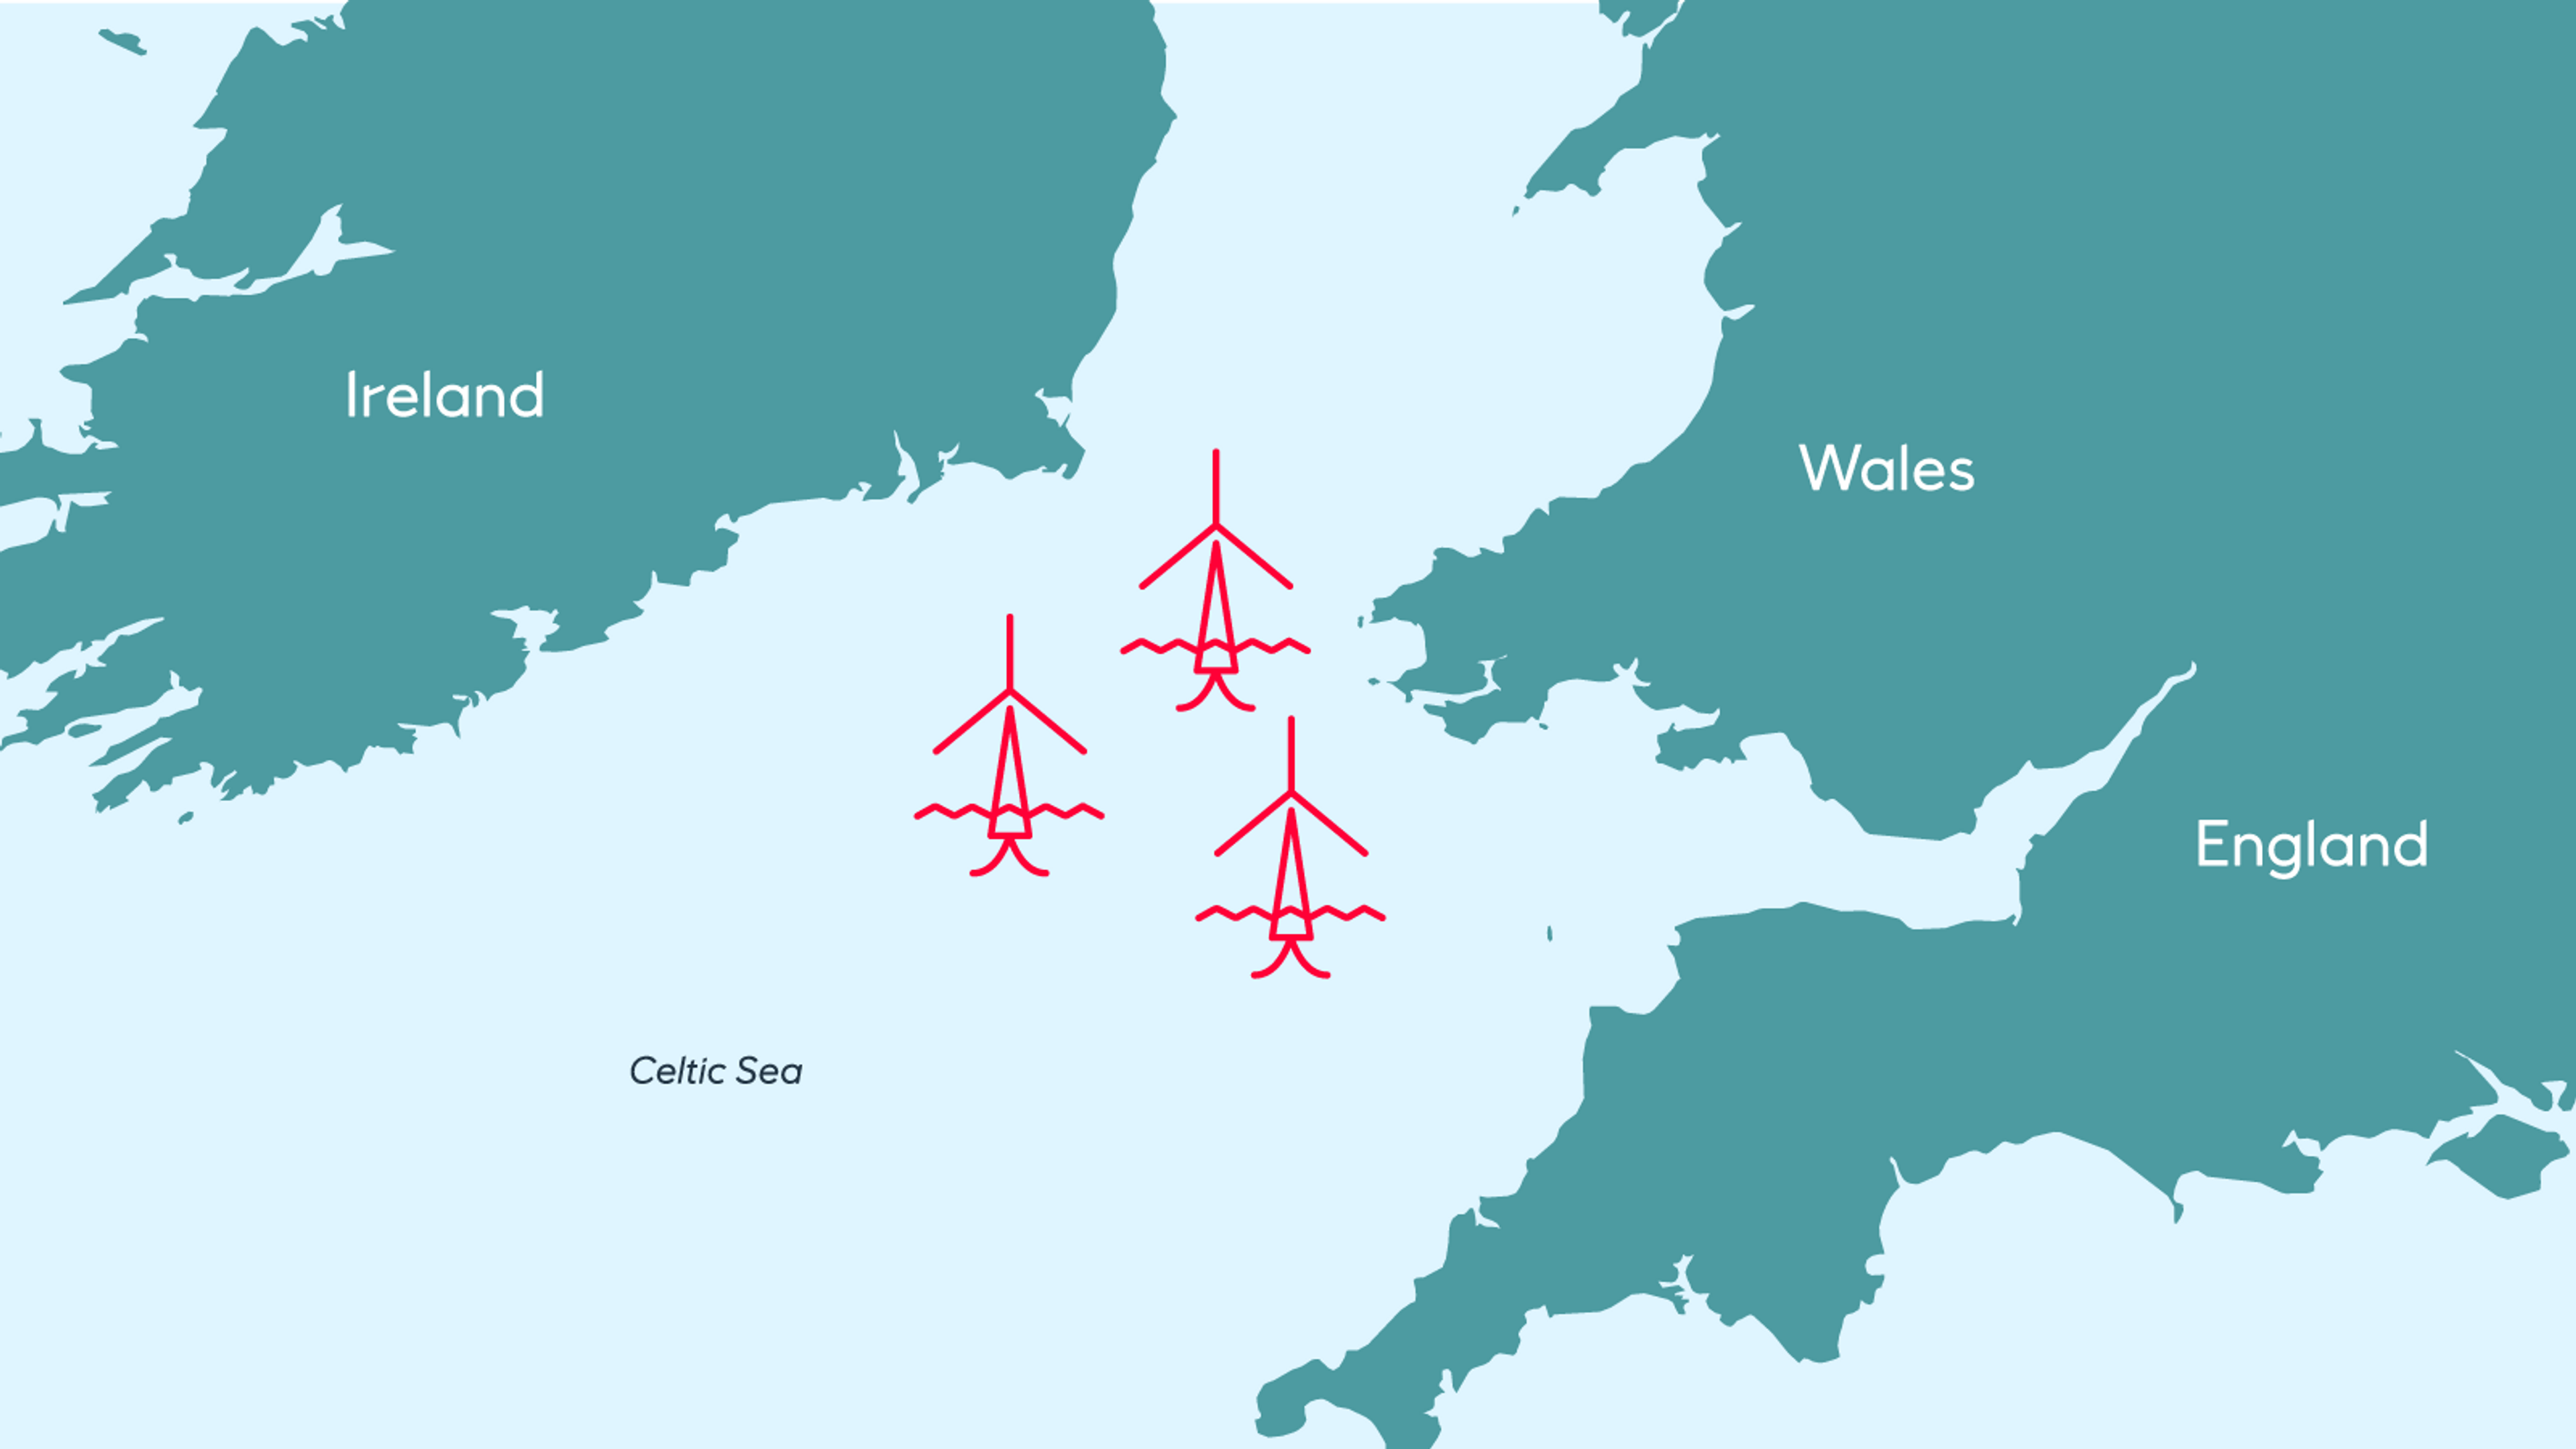 Celtic Sea region with floating wind icons